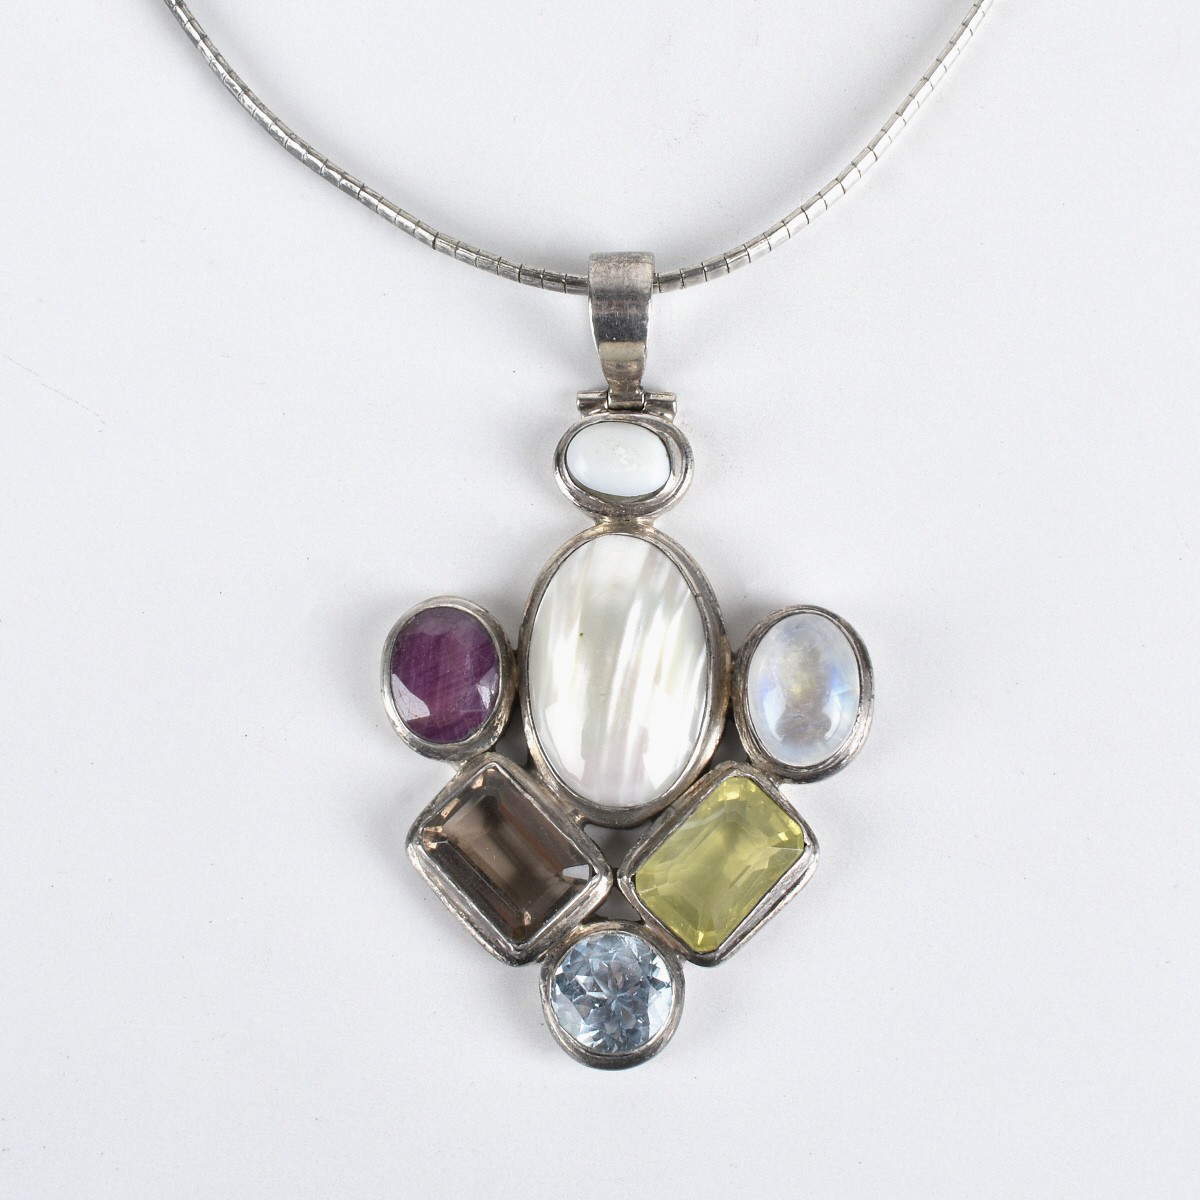 Gemstone and Sterling Necklace